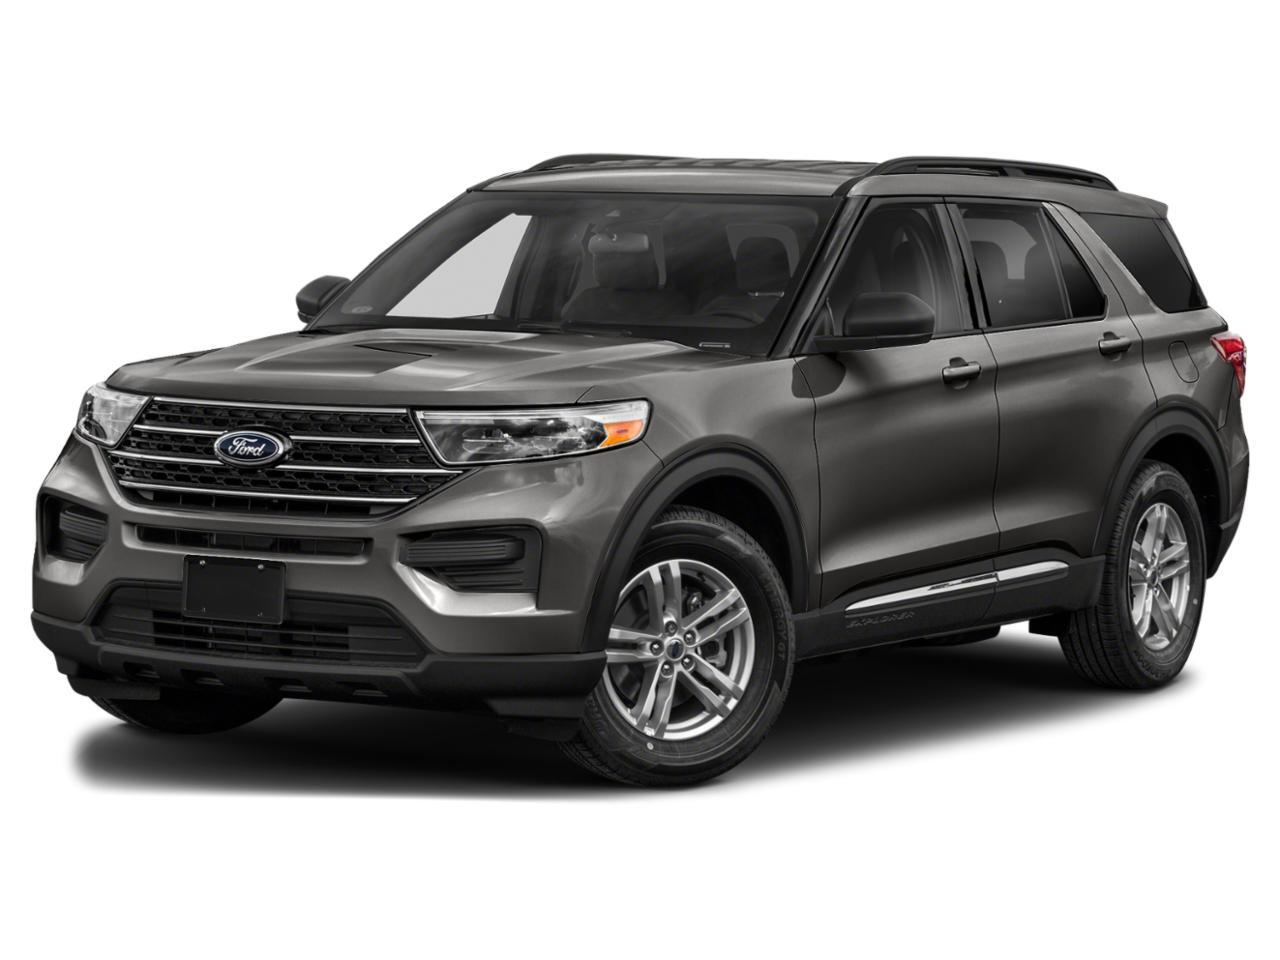 2022 Ford Explorer XLT - 4WD | B/T | 7 PASS | SYNC CONNECT